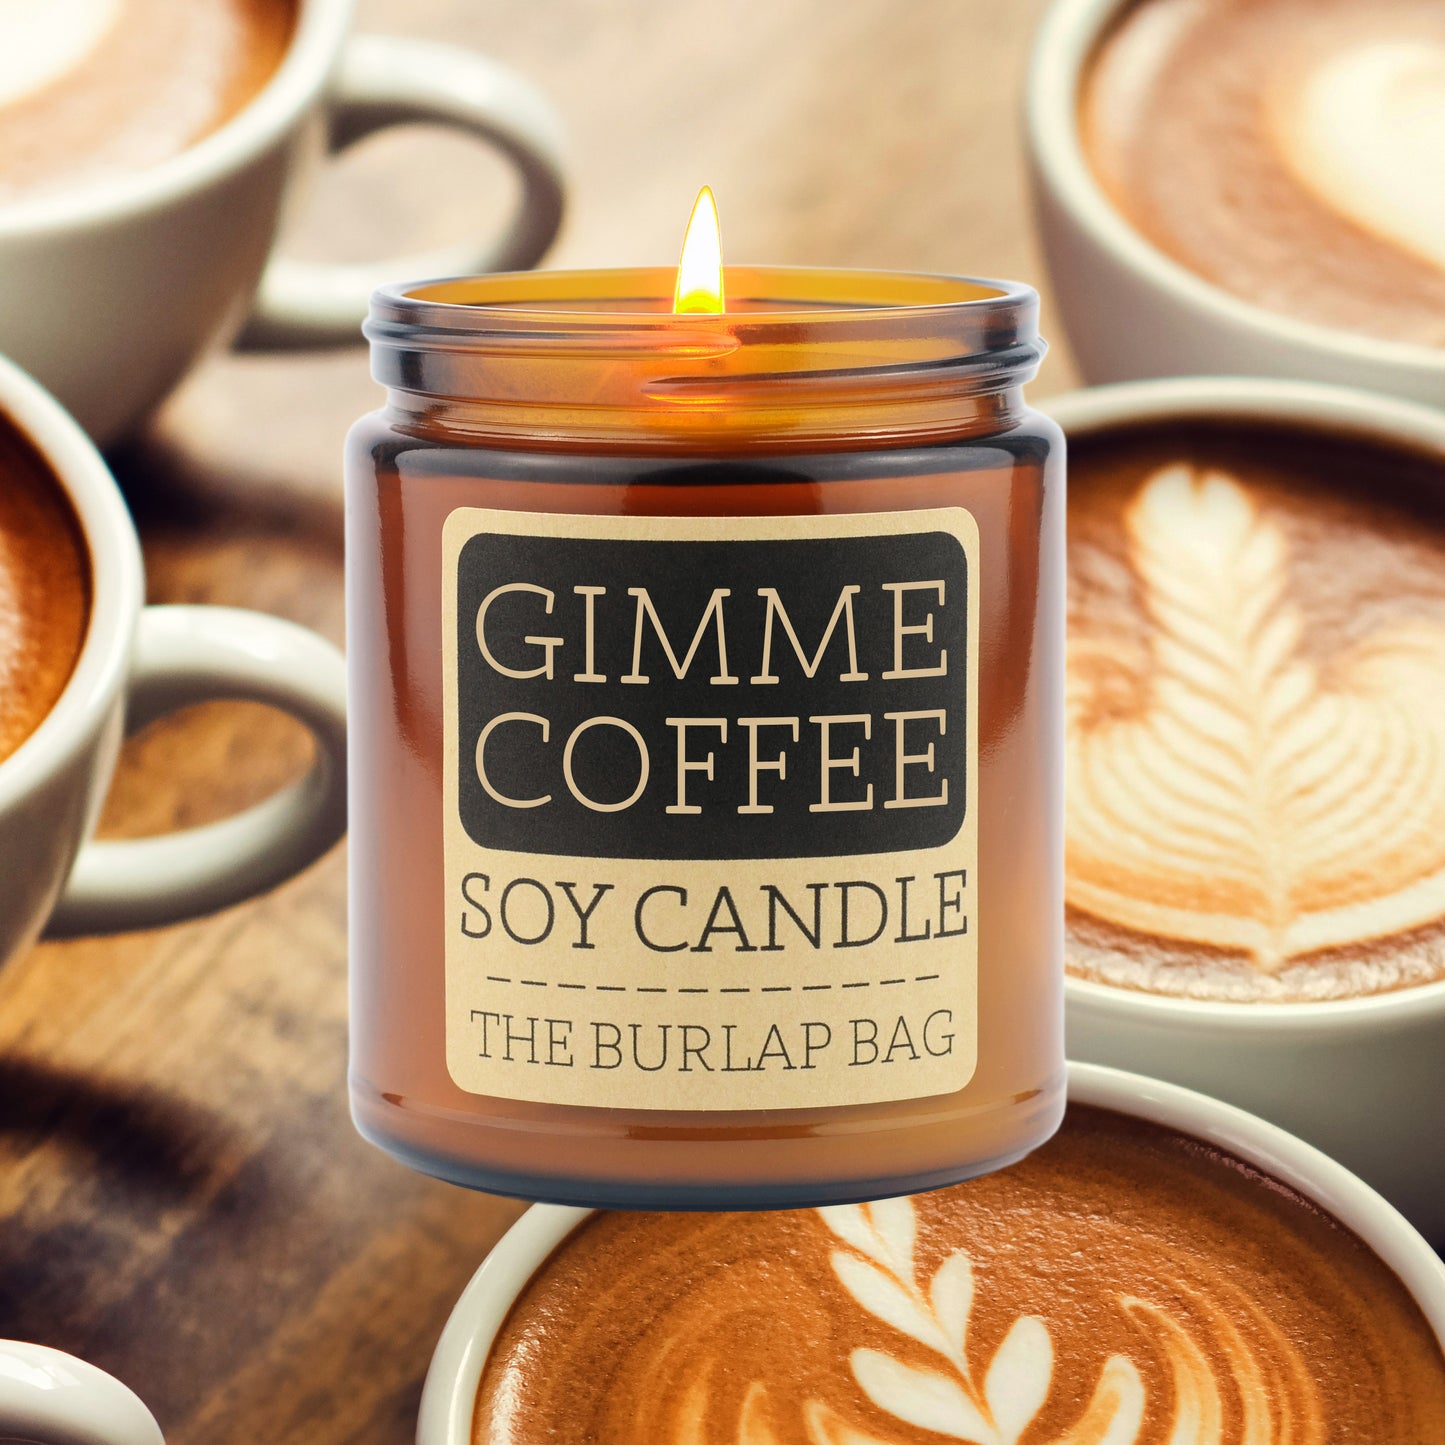 Gimme Coffee - Soy Candle 9oz